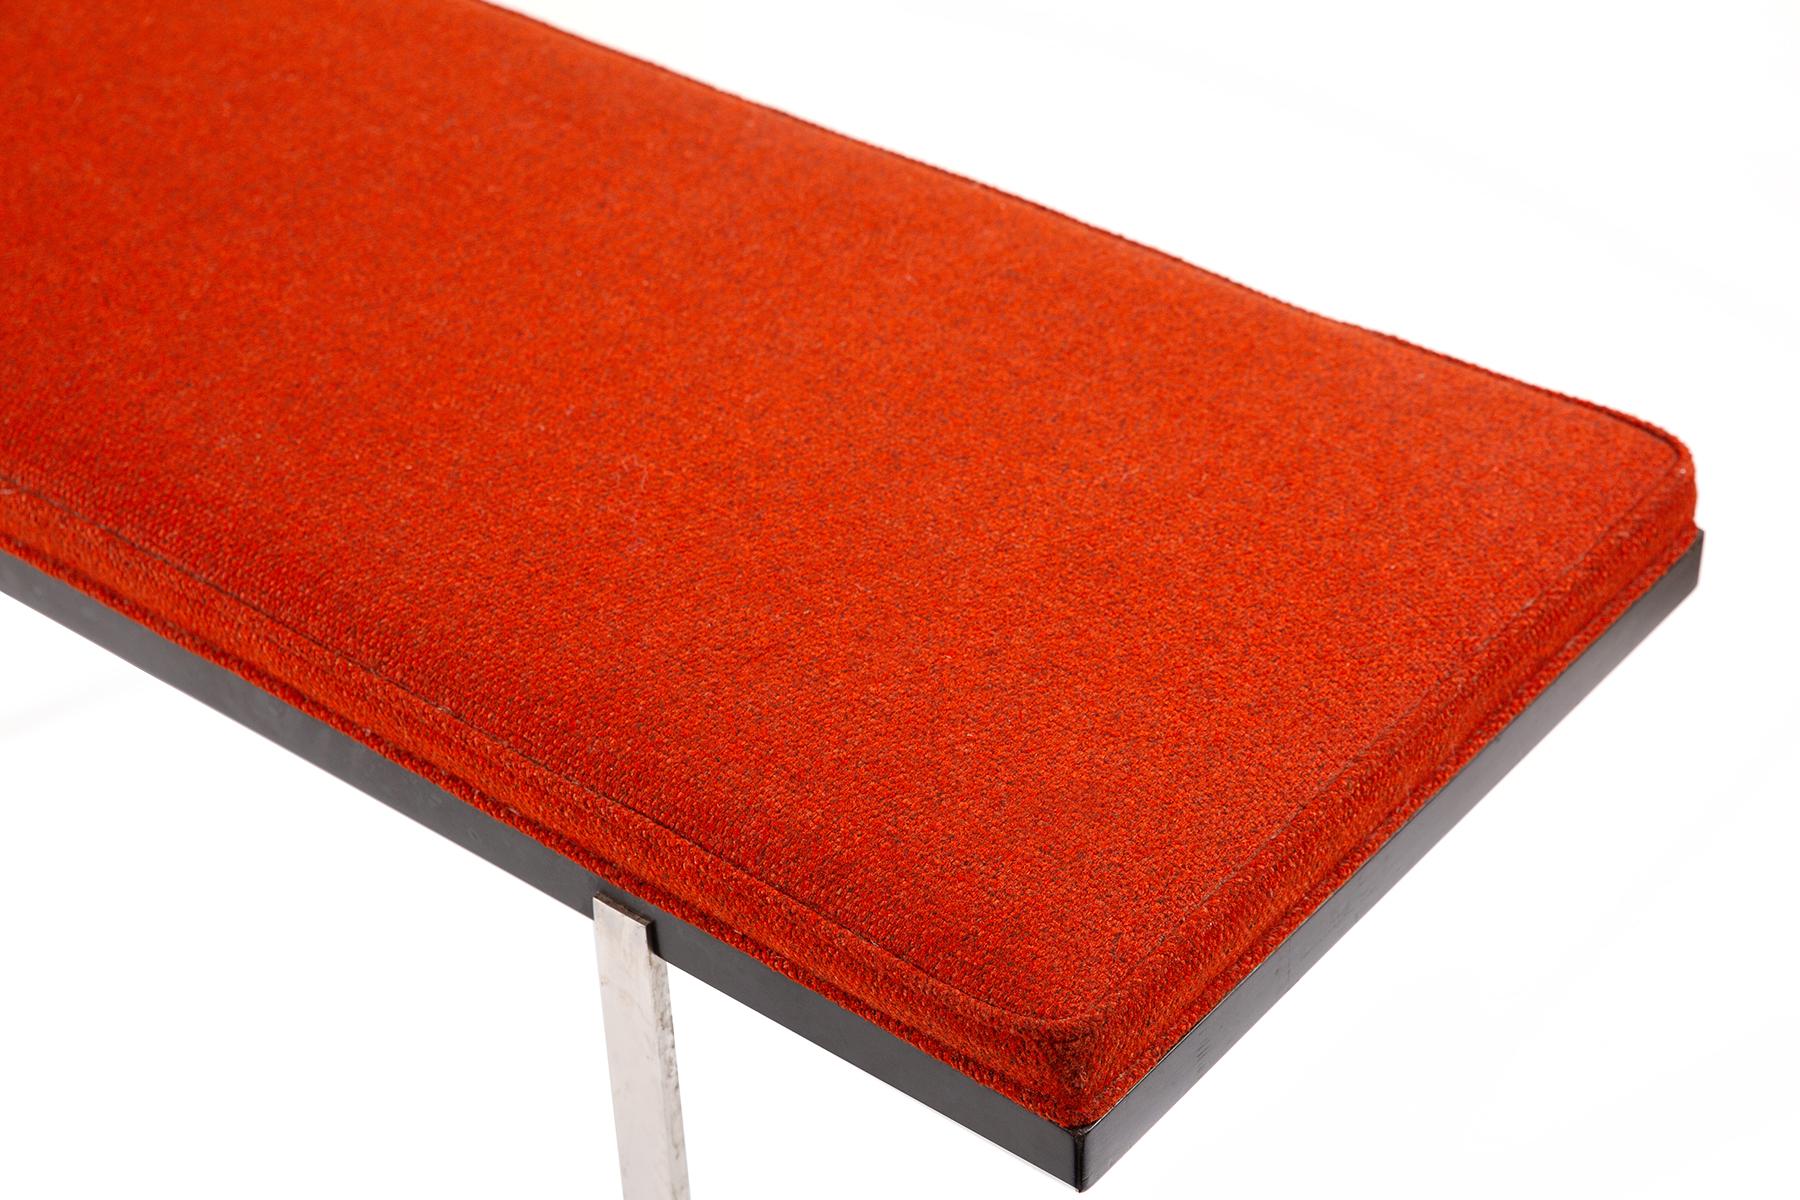 North American Harvey Probber Orange Upholstered Bench with Steel Legs